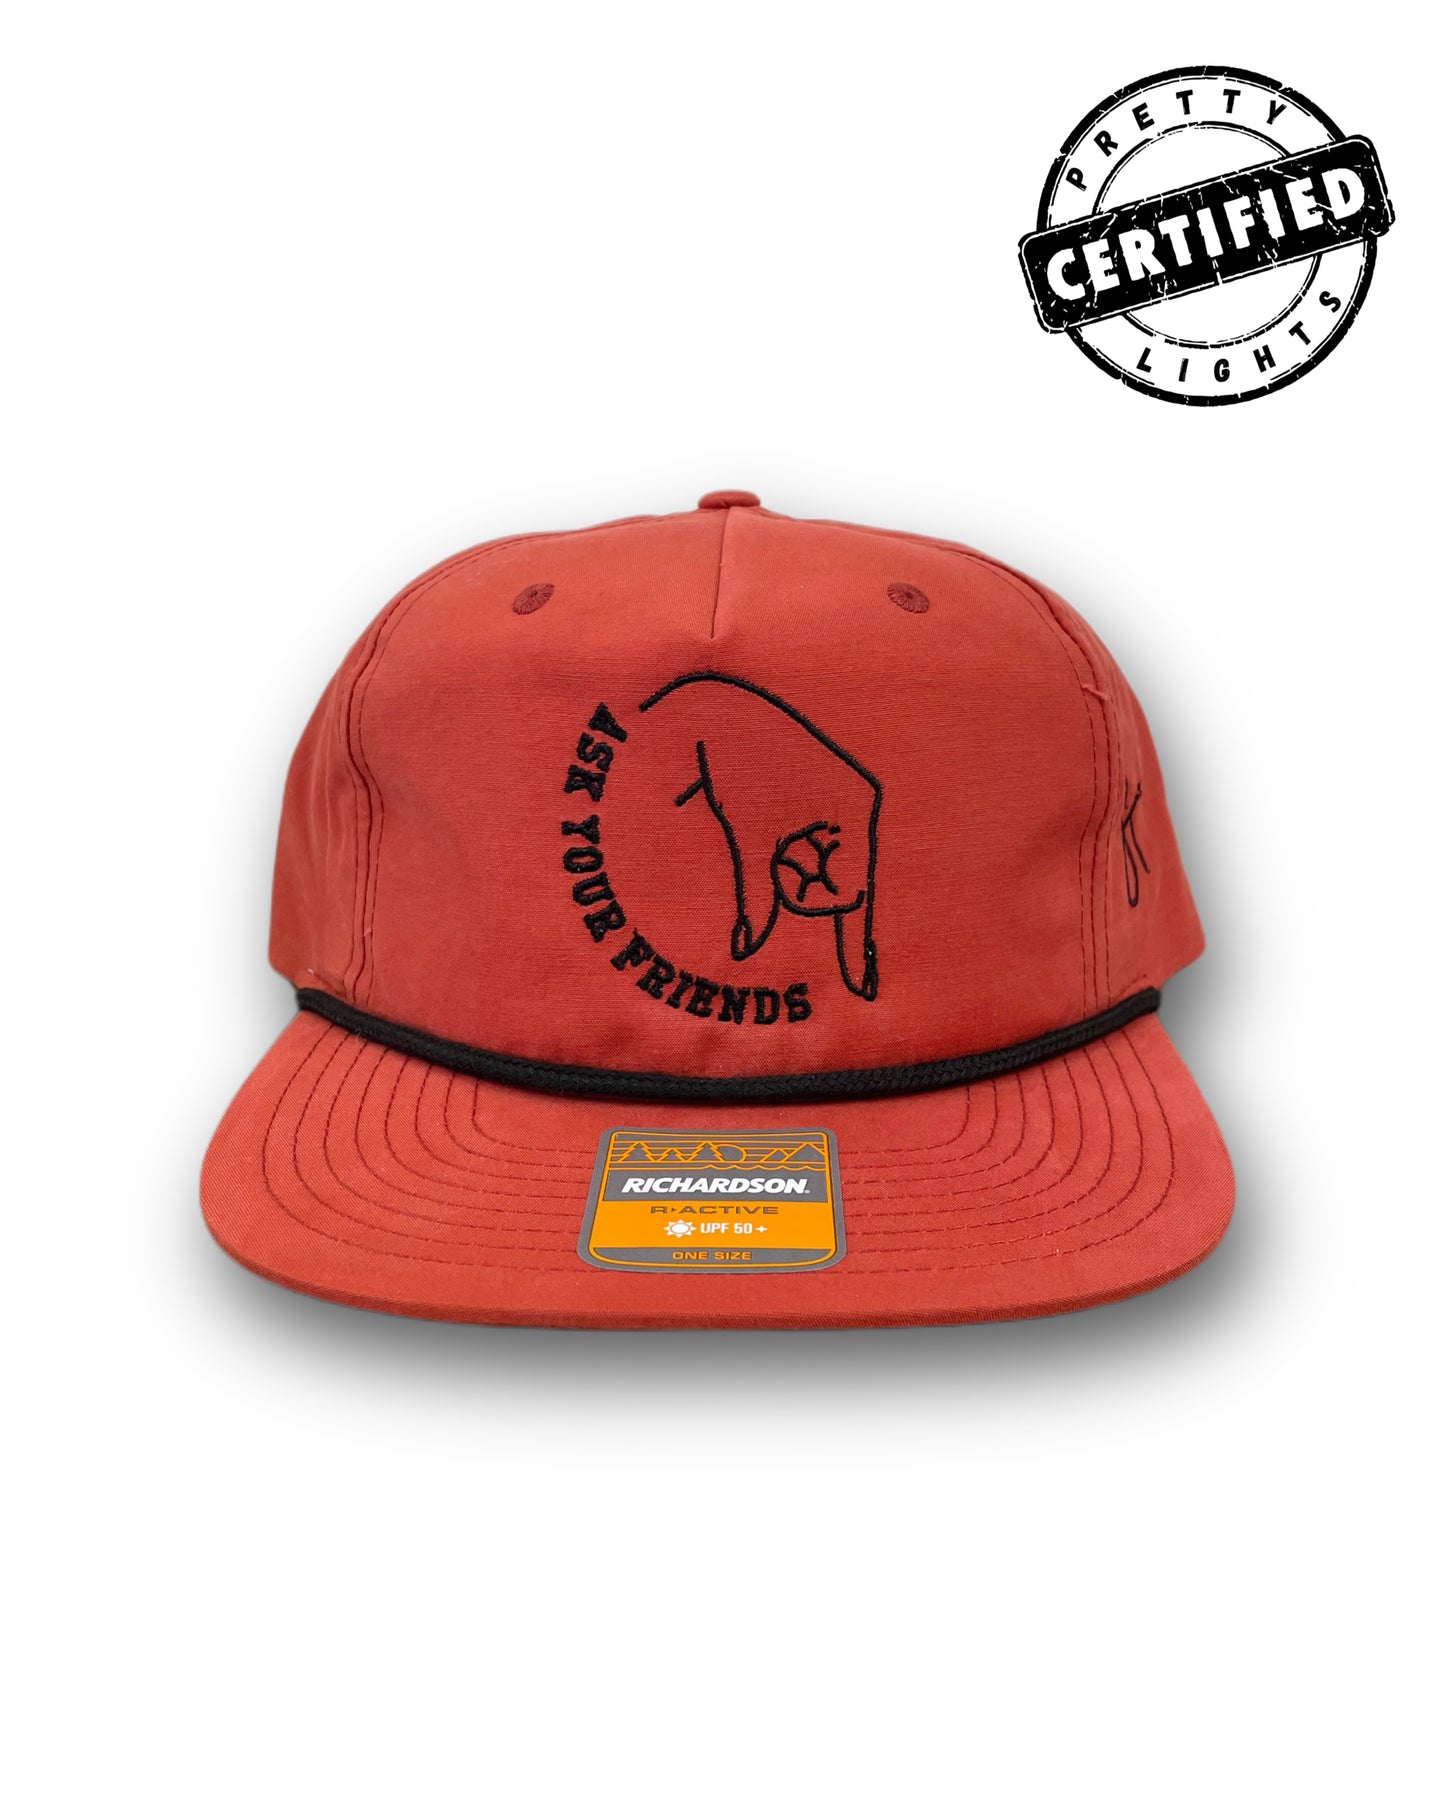 Ask Your Friends 5 Panel Snapback